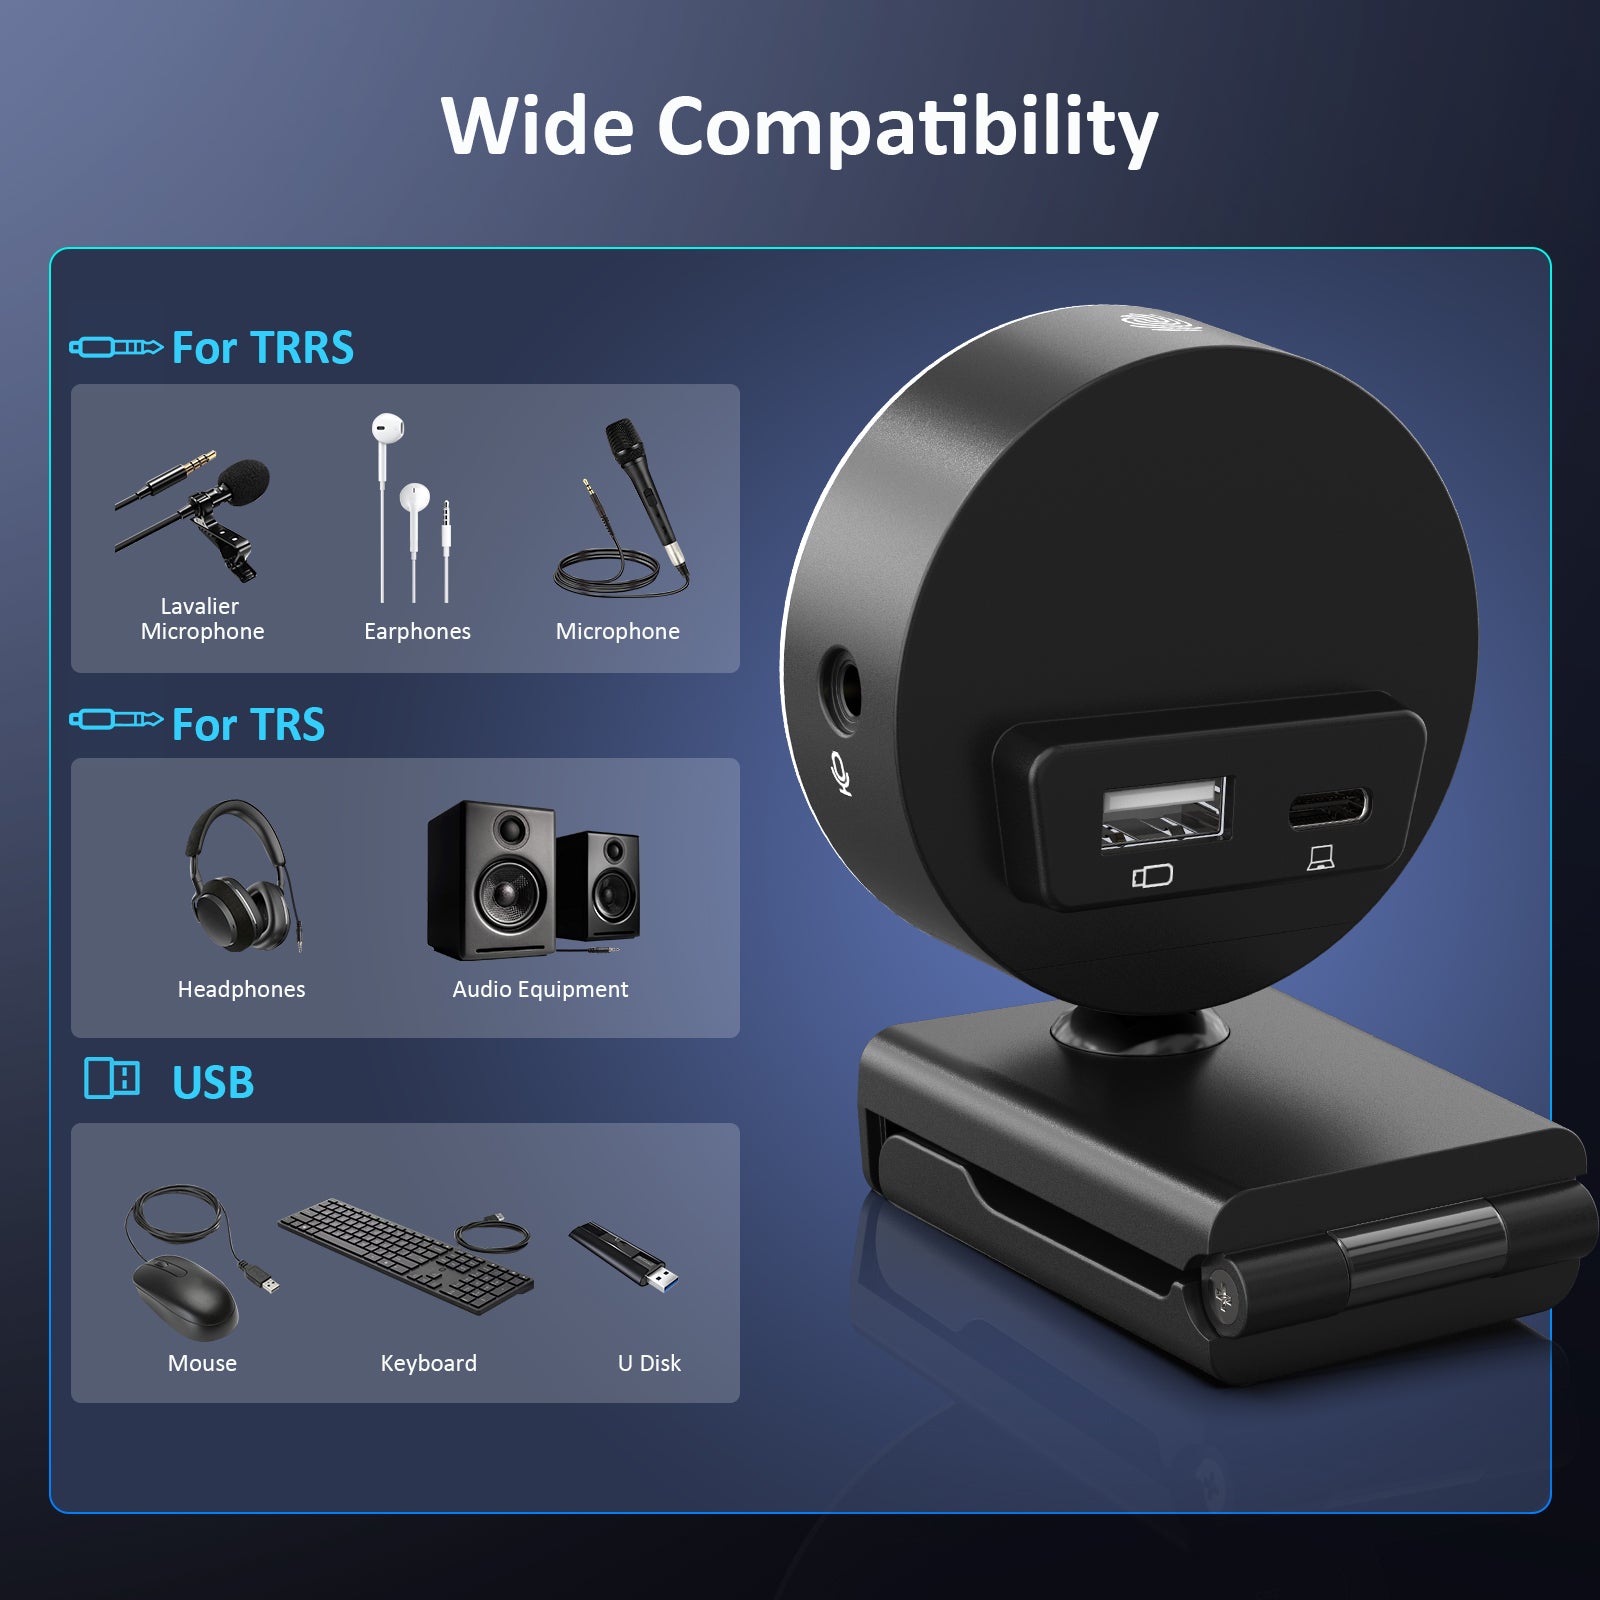 Webcam with additional USB and 3.5mm ports, compatible with devices like headphones and U Disk